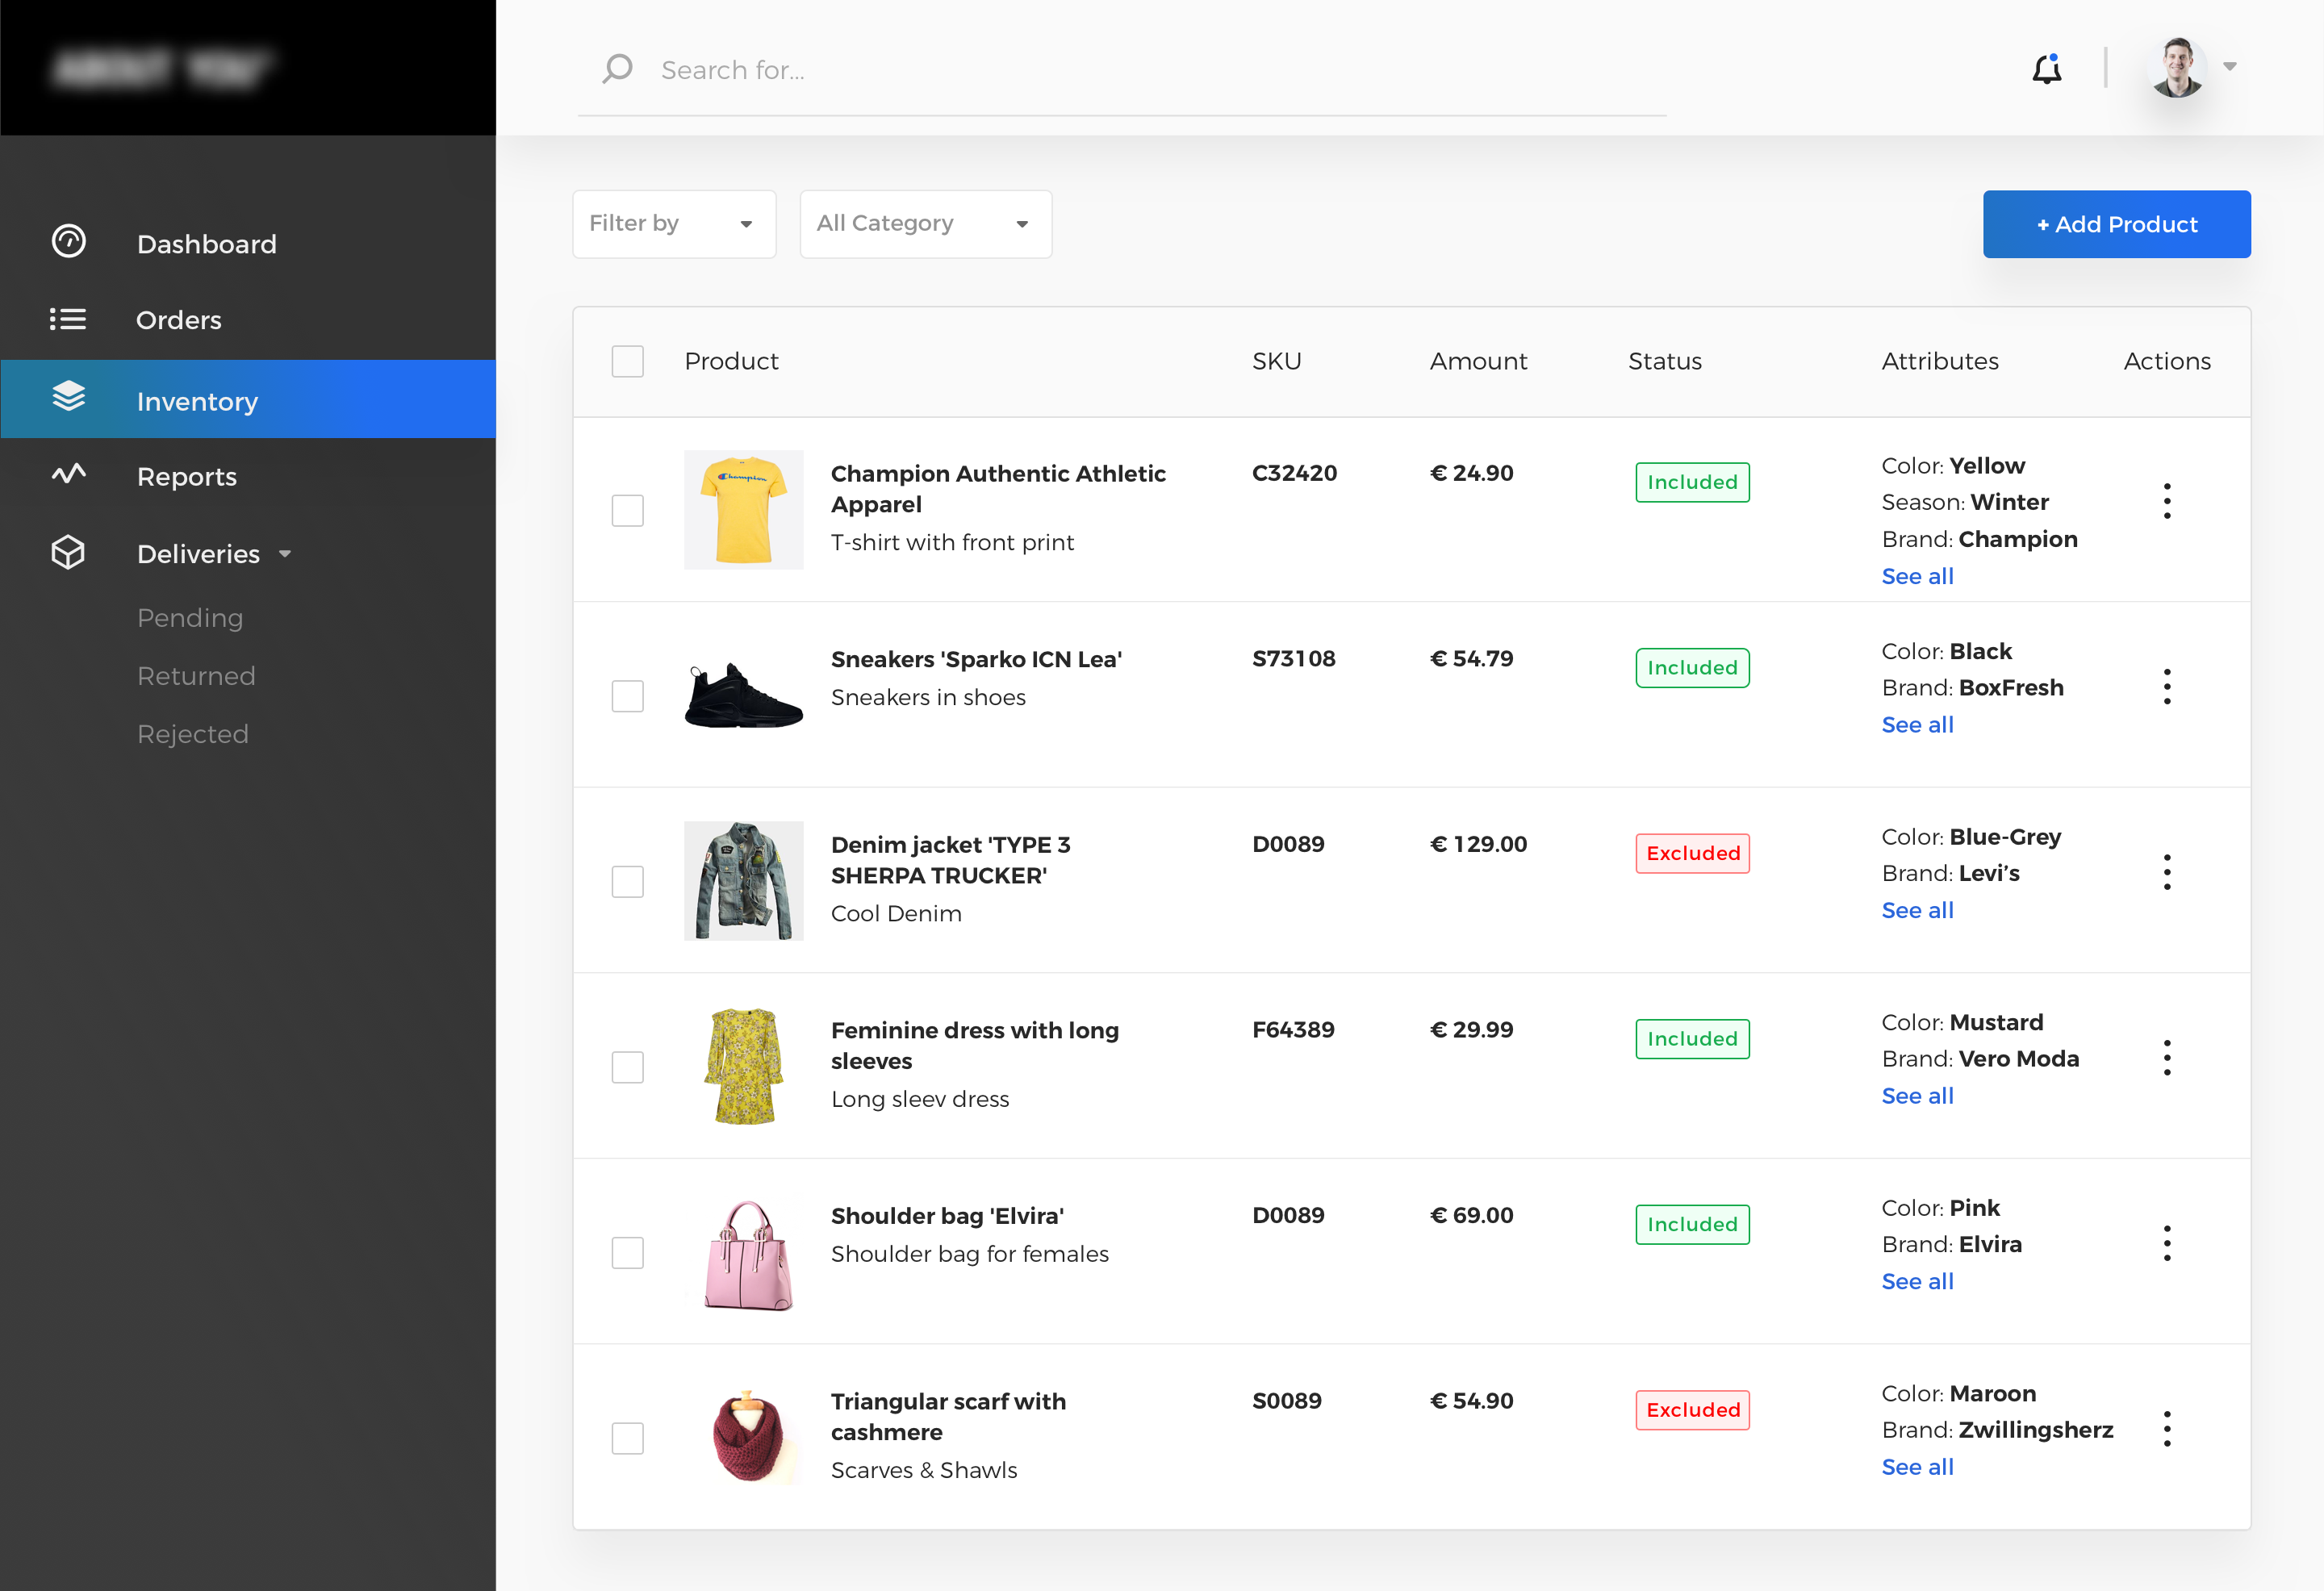 Inventory List - Ecommerce Backend by MJ on Dribbble